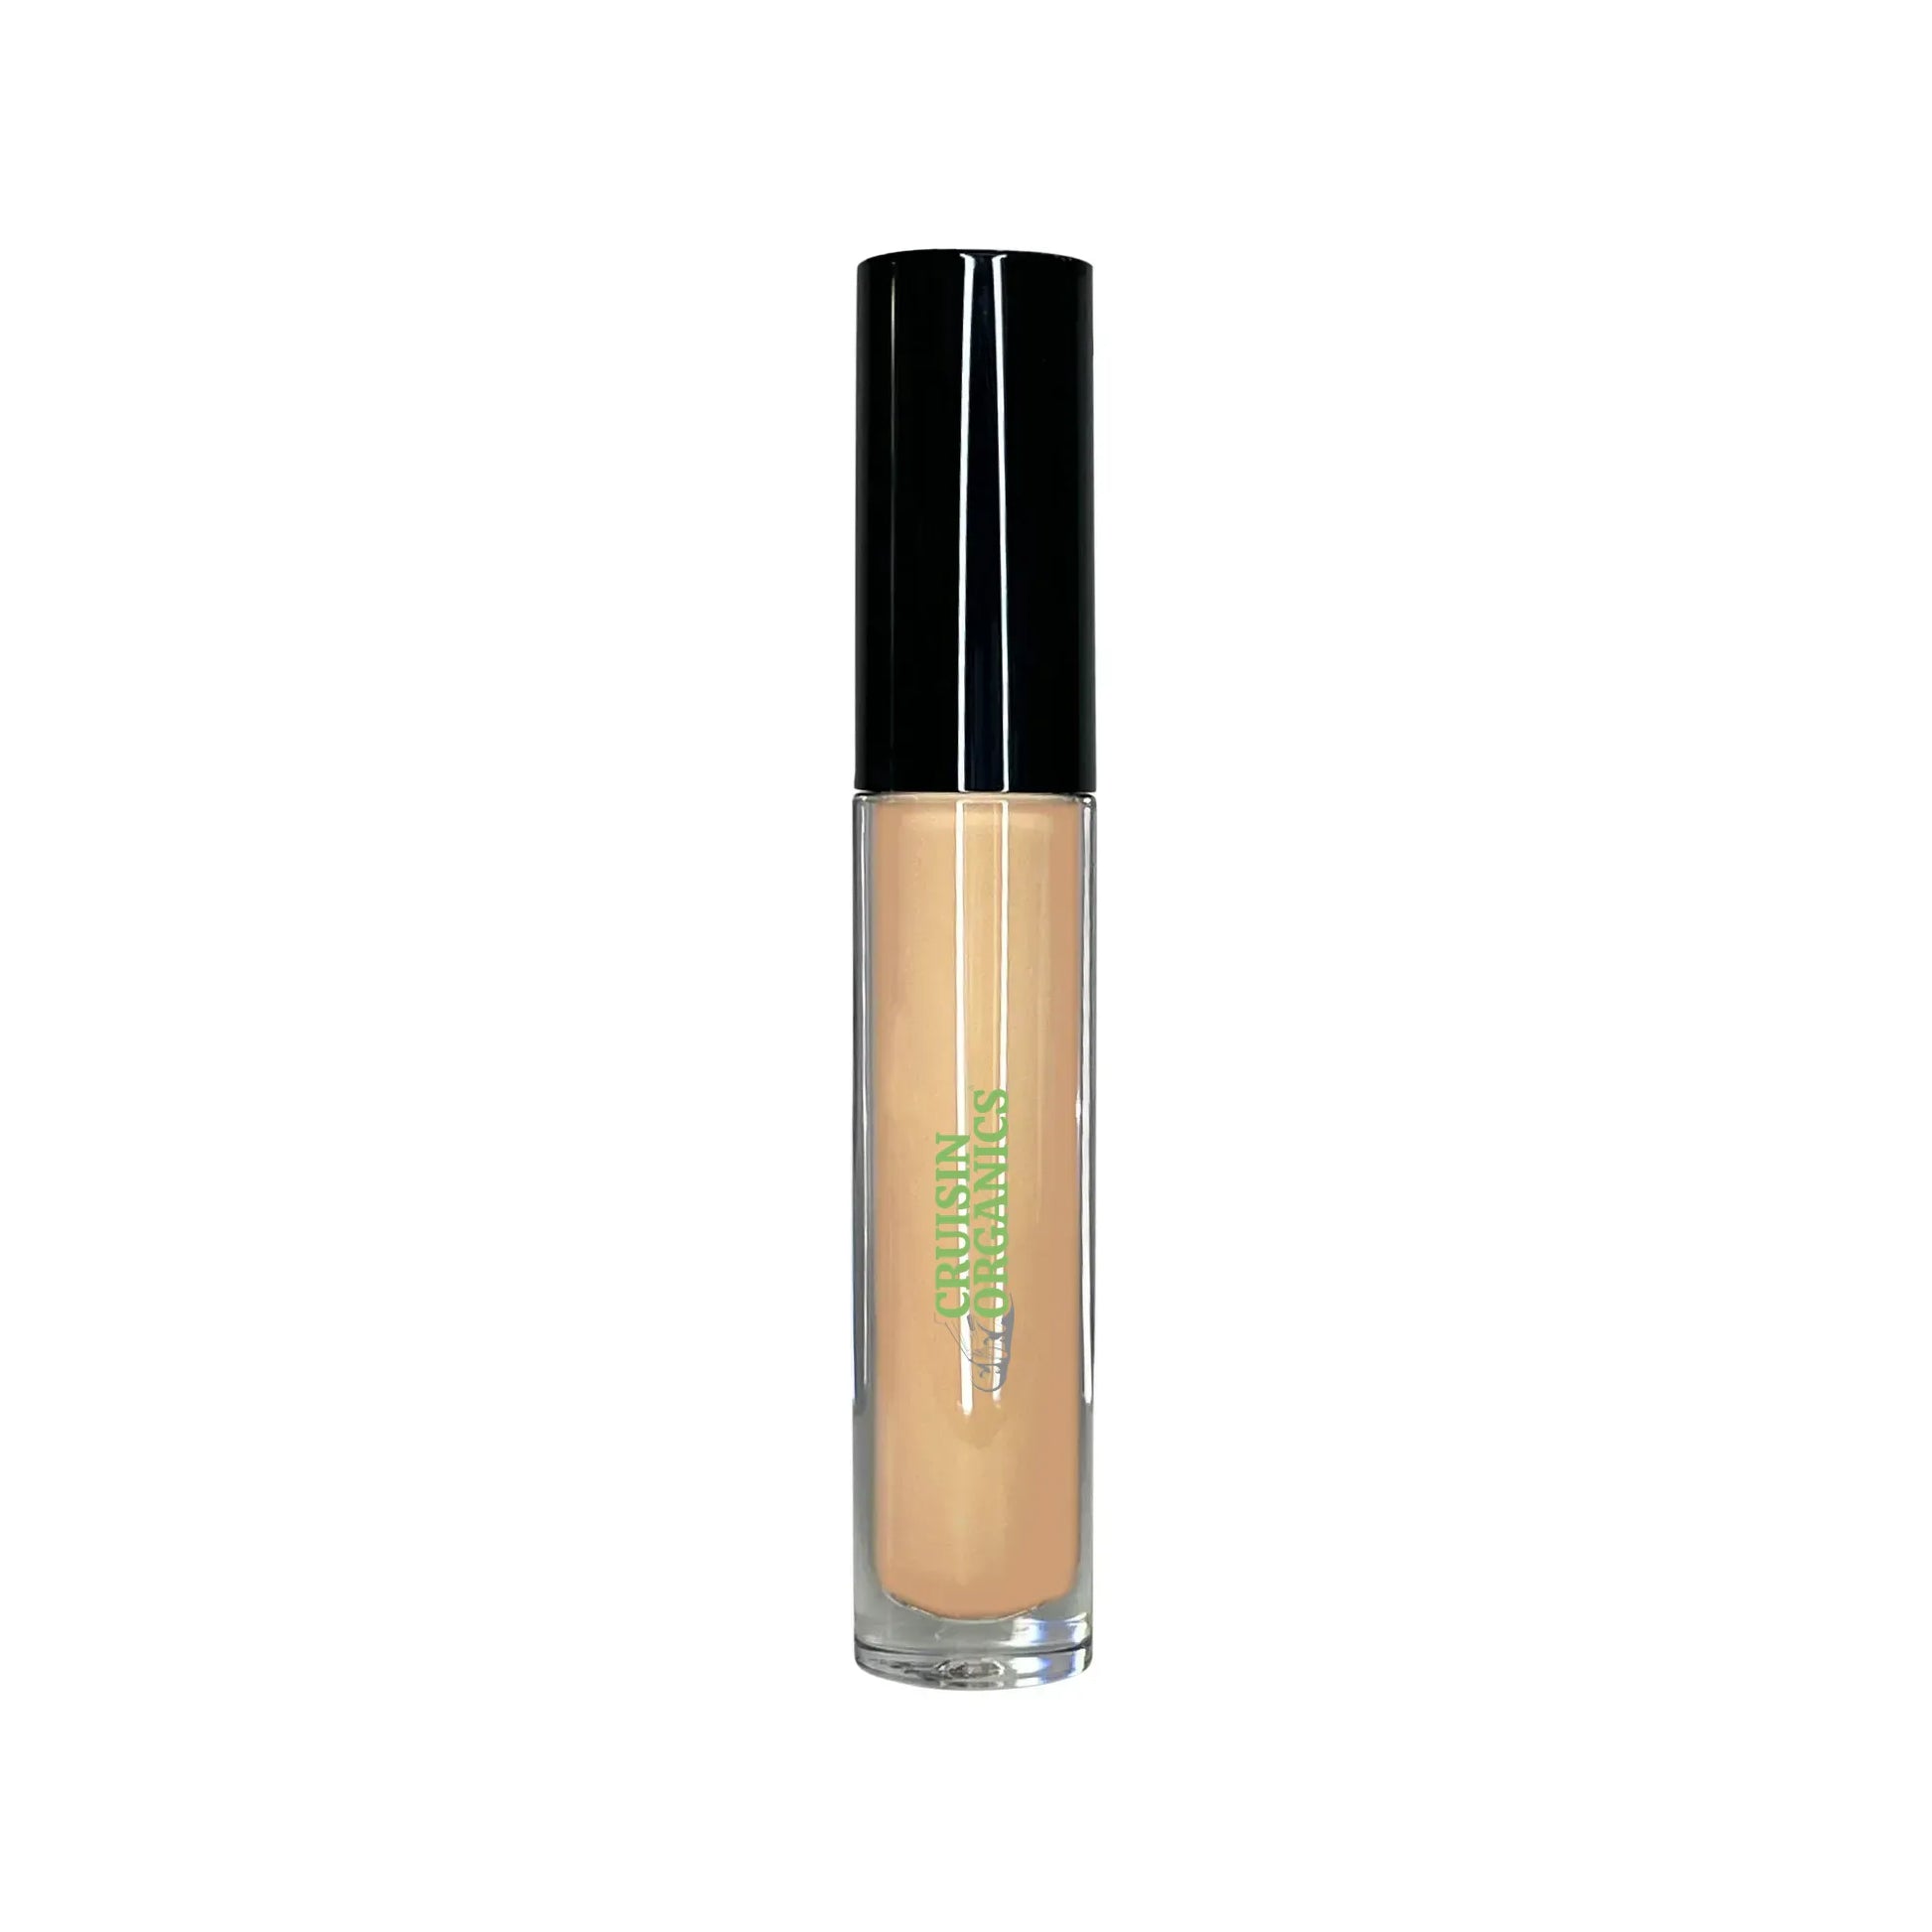 Cruisin Organics Bisquit concealing cream is a full coverage, brightening product! Your new favorite spot treatment of mixed color corrector for combination skin. A curious amalgam of commitment to ethical beauty principles, the modern layered over your foundation. This strength of the extreme concoction to brighten your skin and conceals difficult tones. Much loved doe-foot applicator for simple brew on tough dark spots.